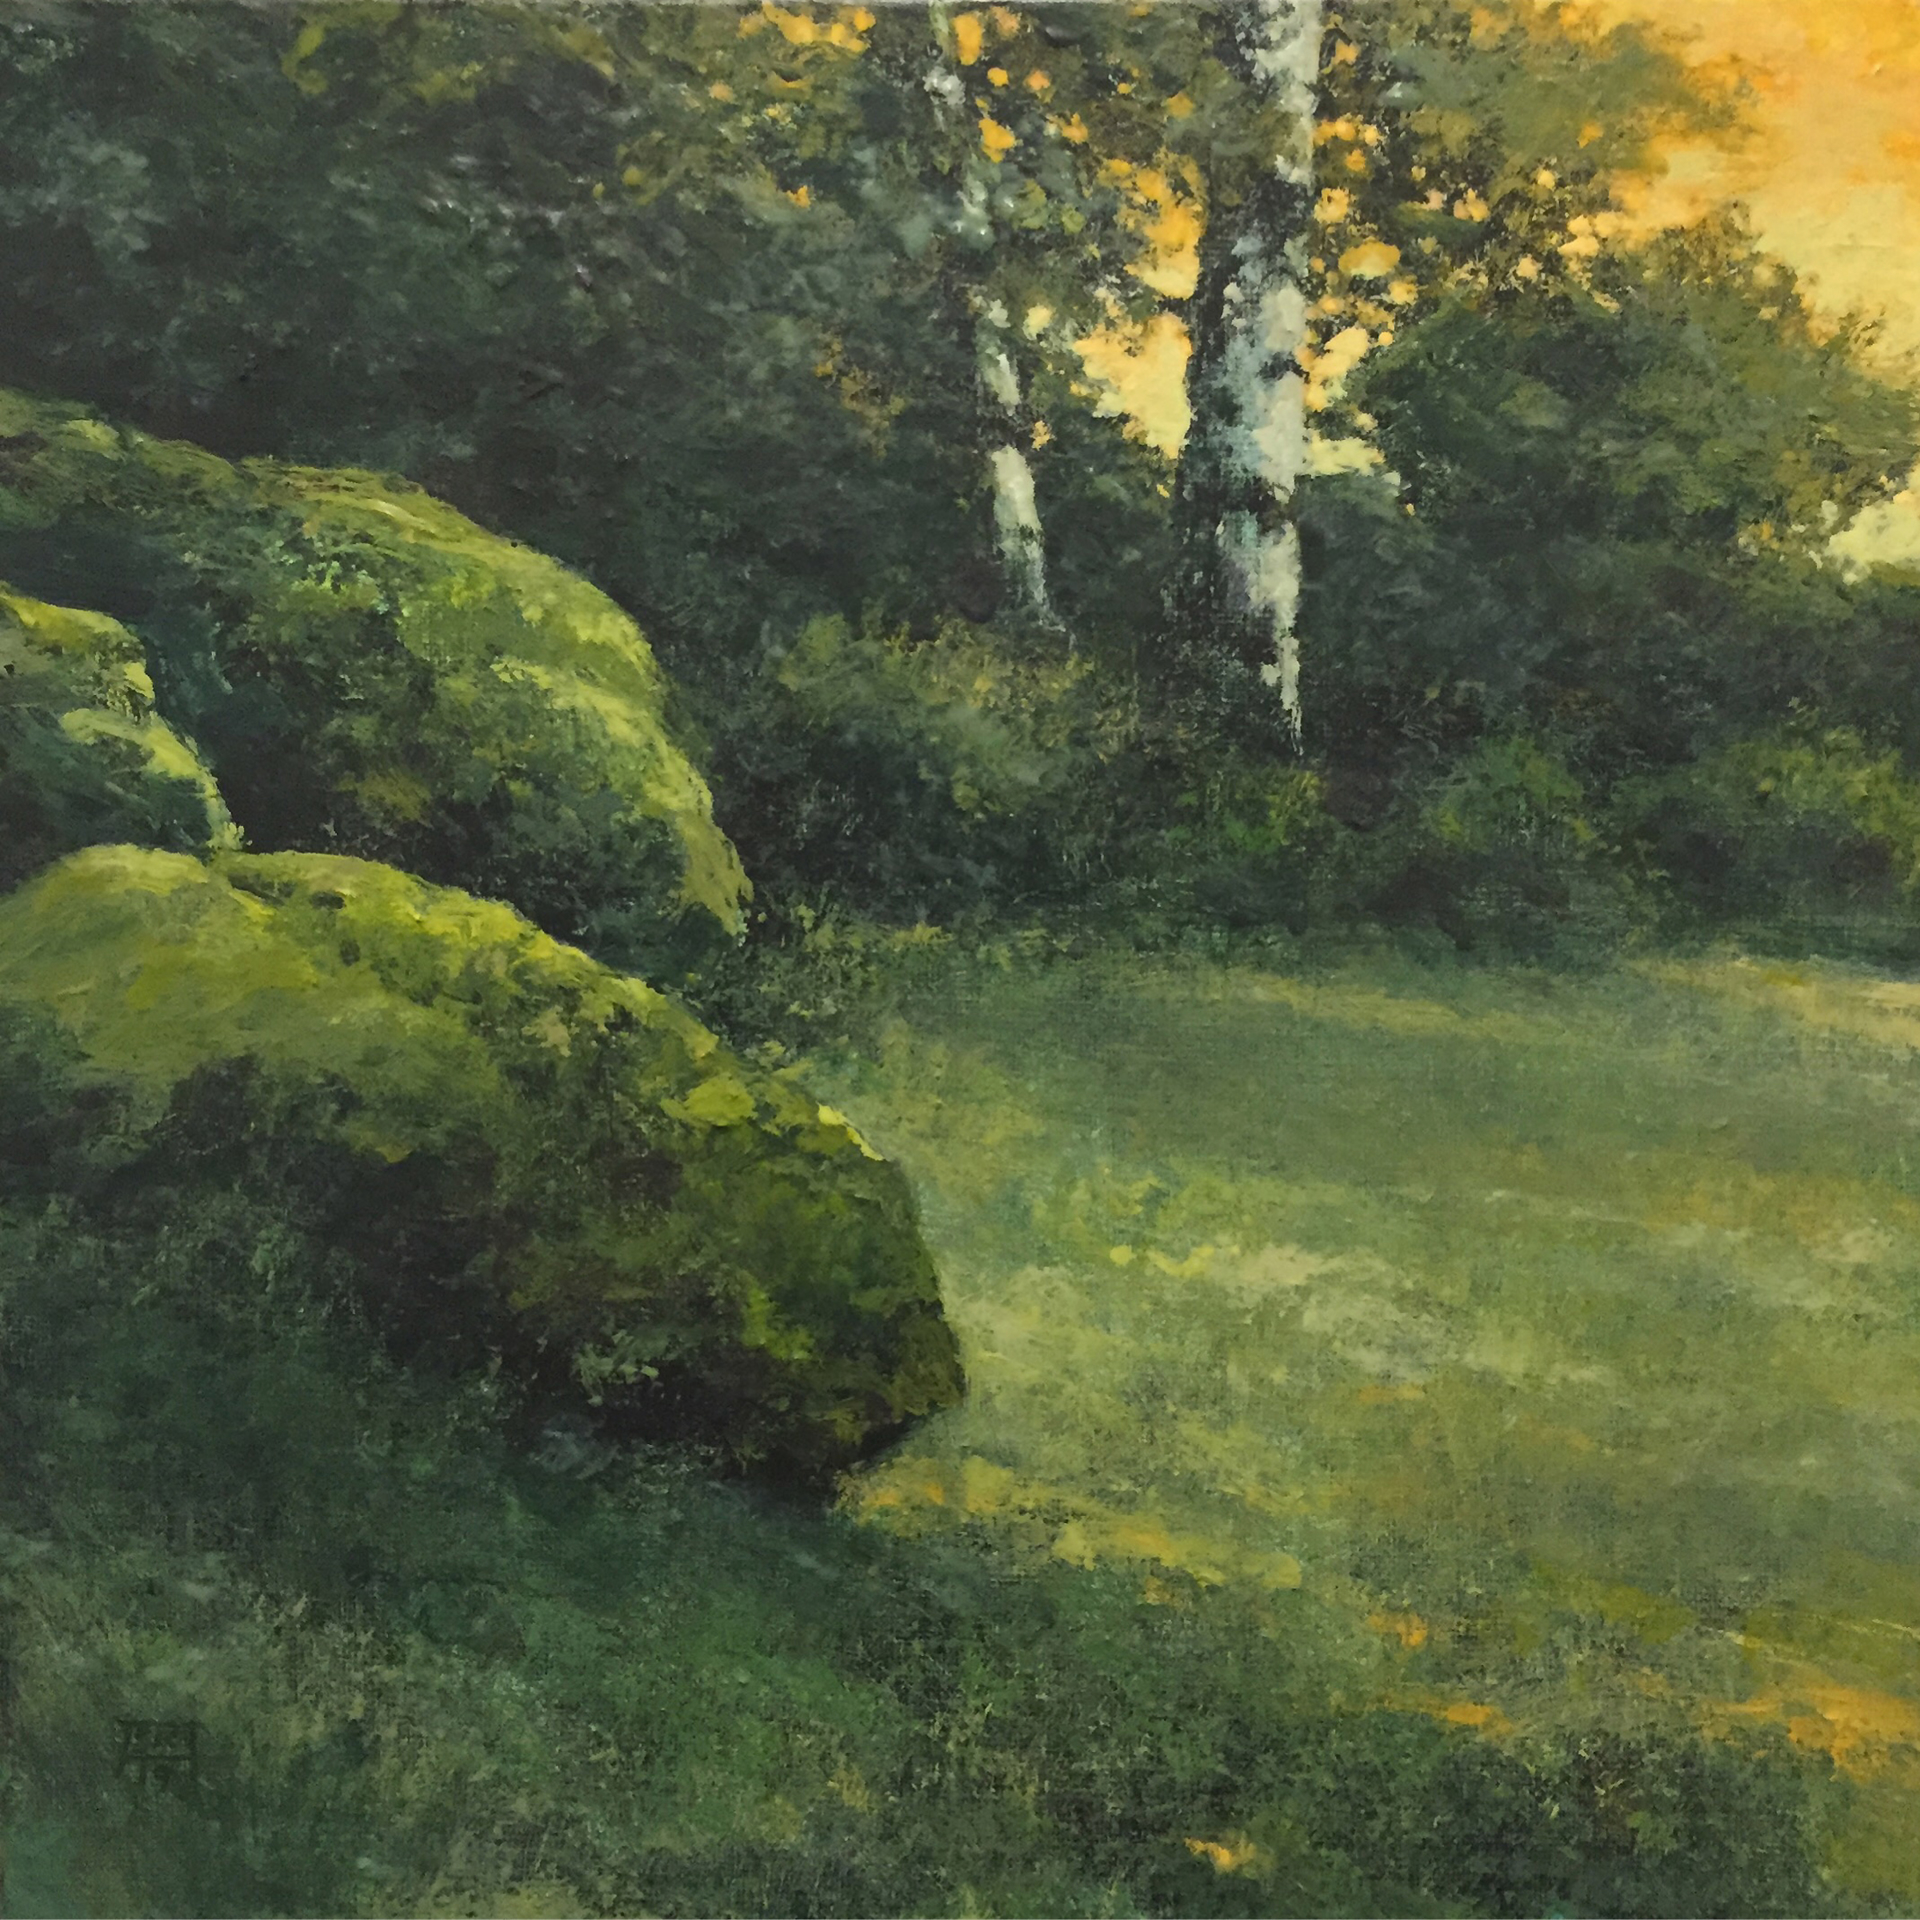 Field and Stone Study by Shawn Krueger